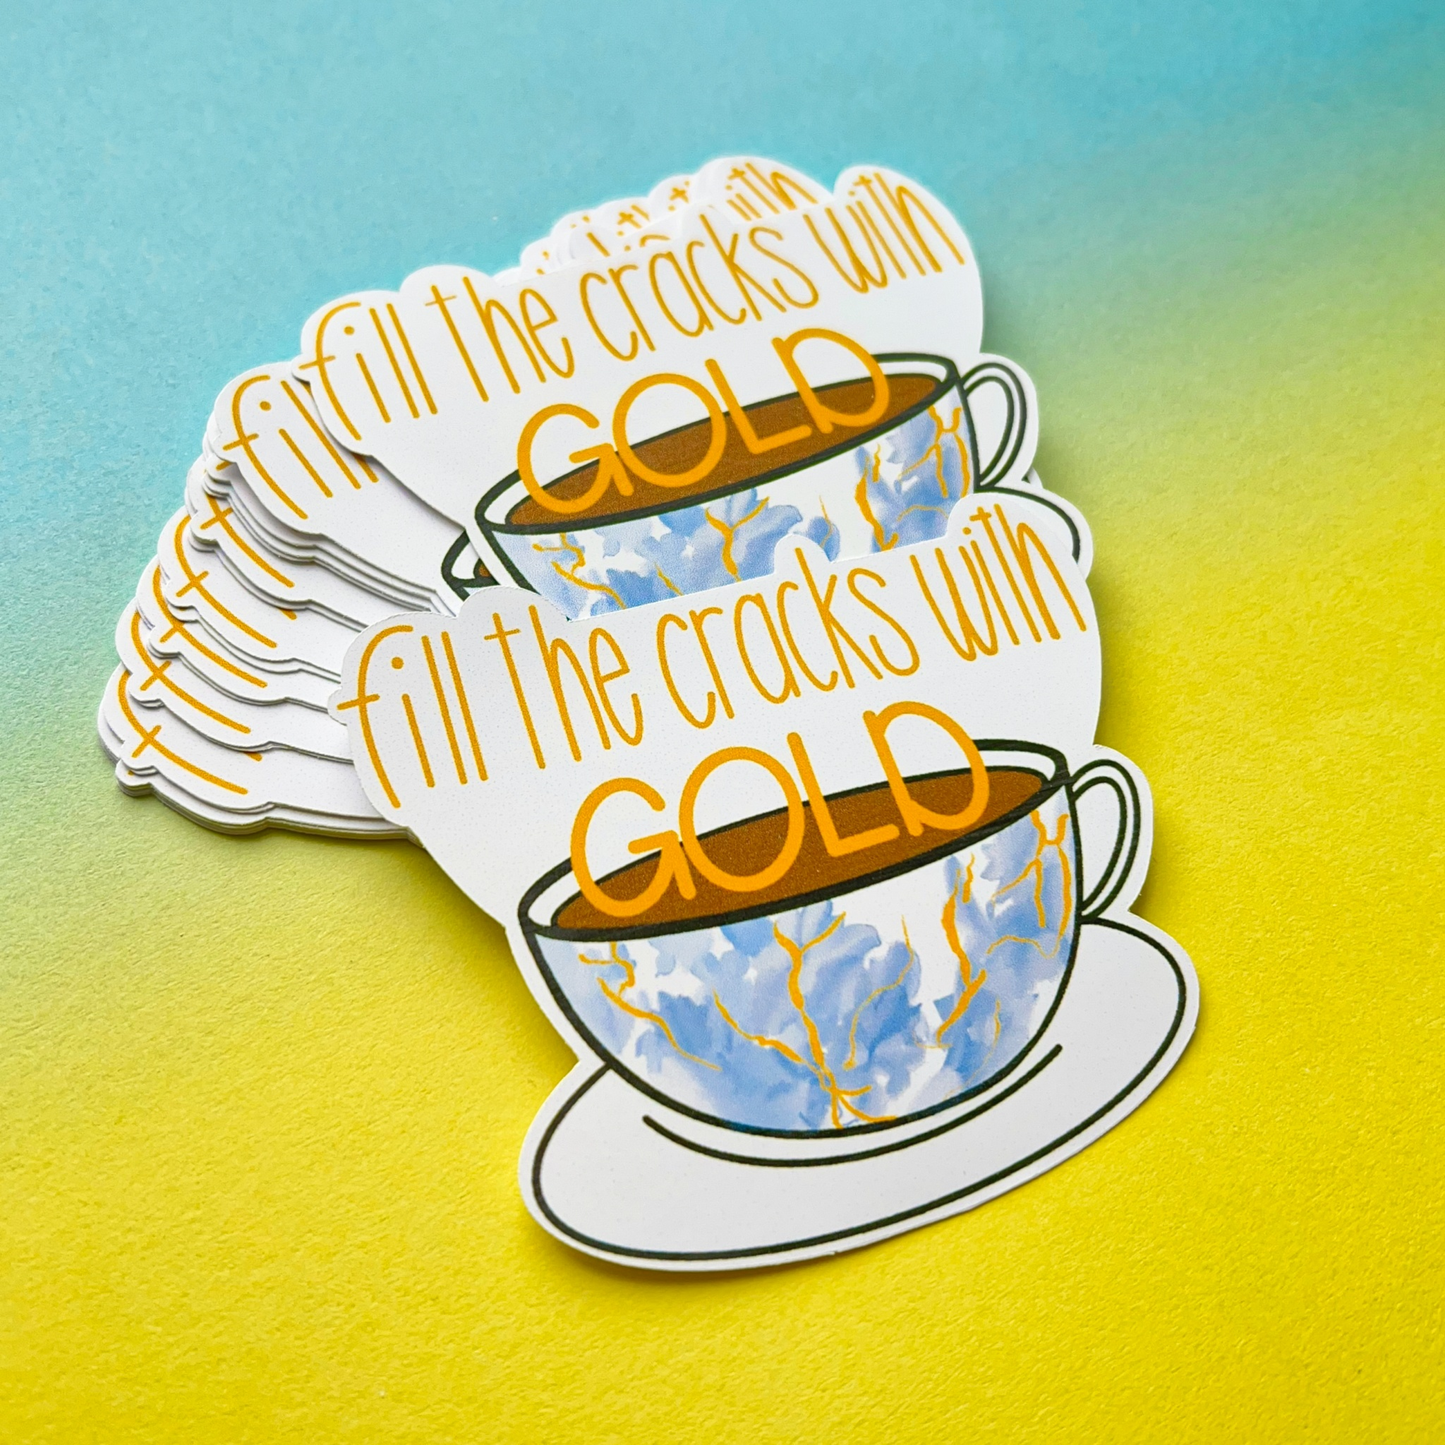 Fill the Cracks with Gold Vinyl Sticker